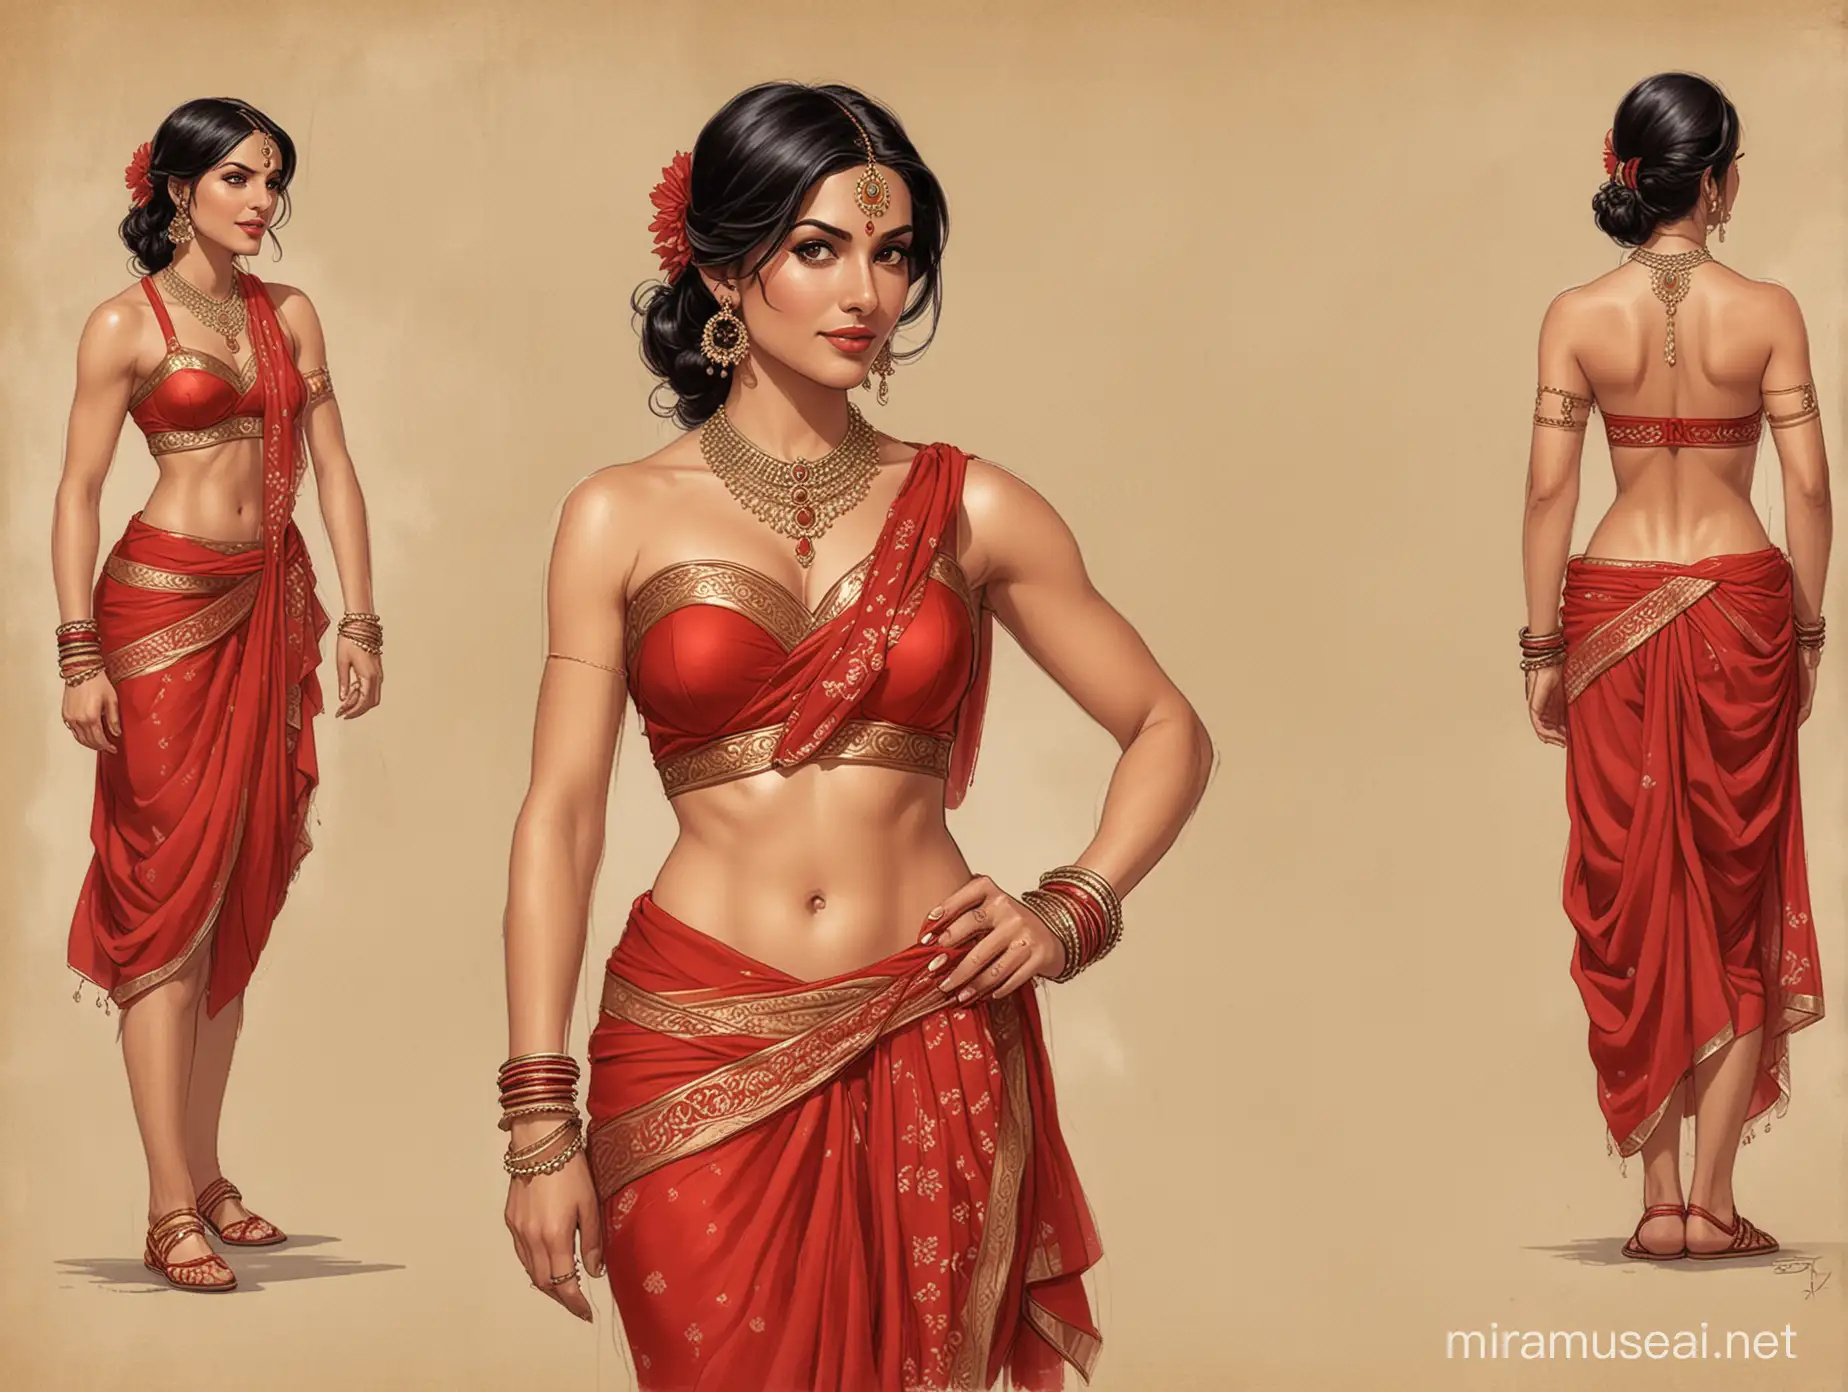 Diana Palmer Walker in Elegant Red Lingerie and Saree